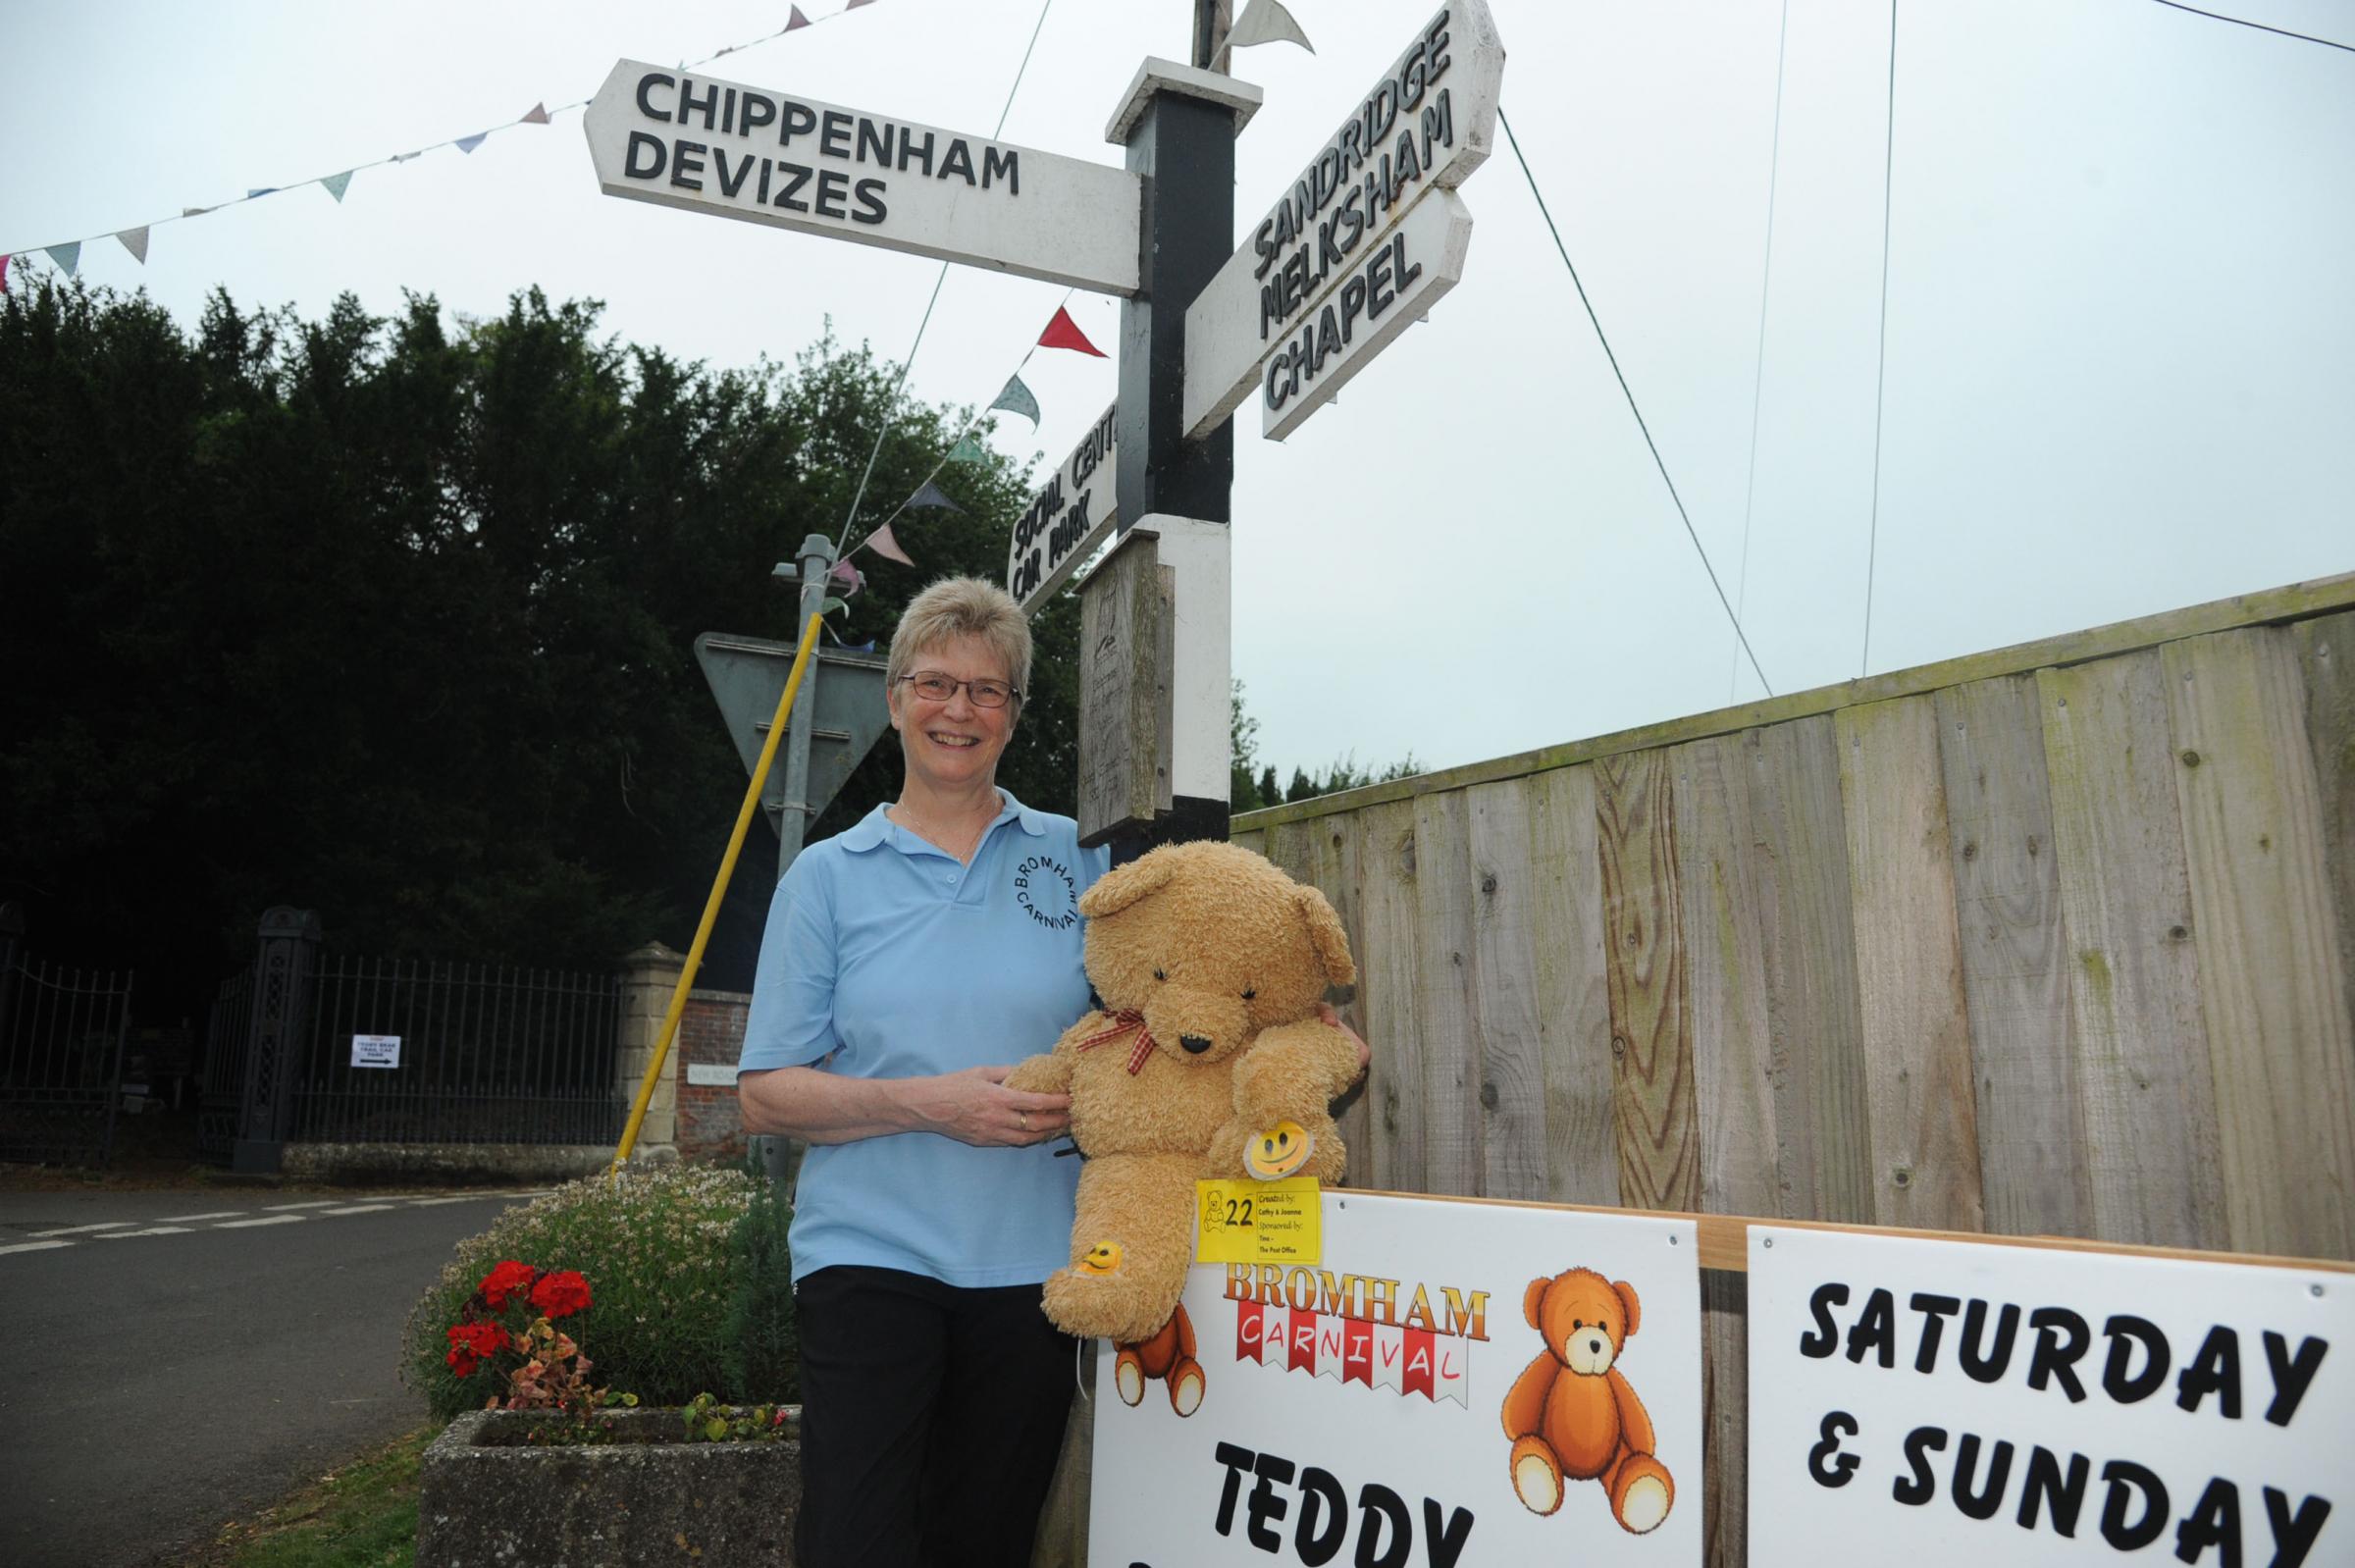 Bromham Teddy Bear Trail Event co ordinator Cathy Welch with the signs for the fund raising event toward the Bromham club rebuild Photo Trevor Porter 67525 2